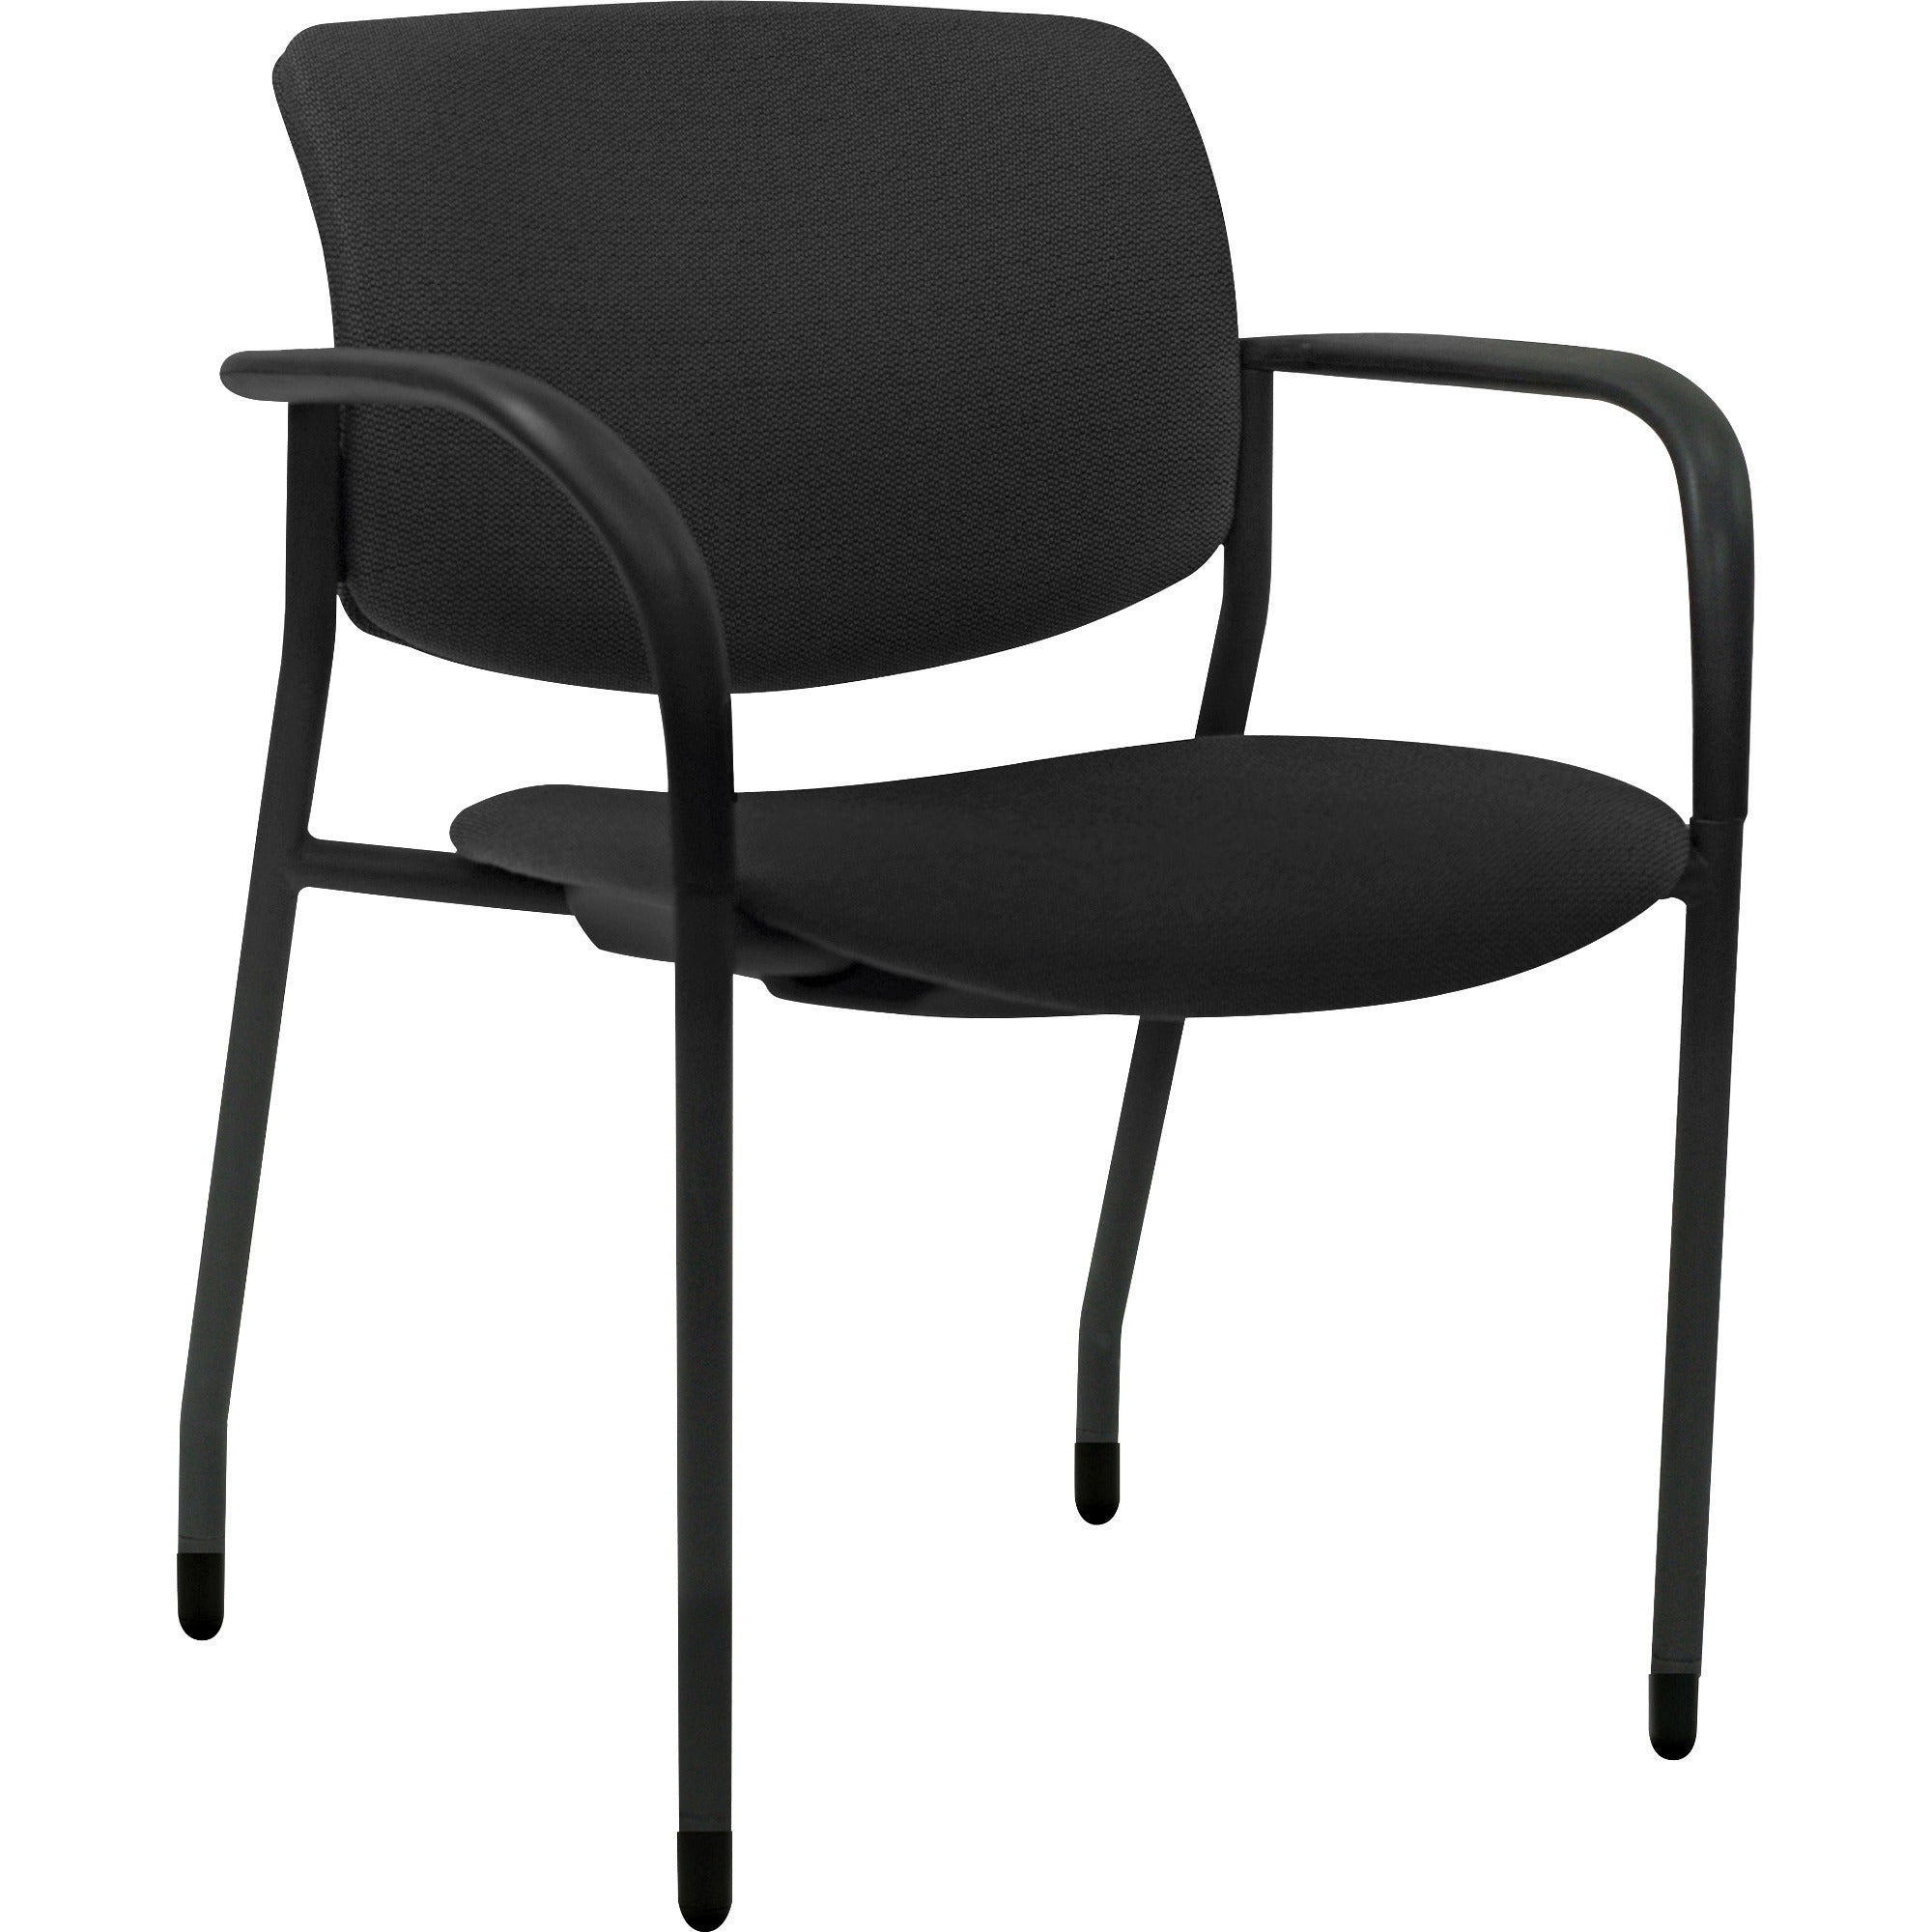 lorell-advent-upholstered-stack-chairs-with-arms-black-foam-crepe-fabric-seat-black-foam-crepe-fabric-back-powder-coated-black-tubular-steel-frame-four-legged-base-armrest-2-carton_llr83114 - 1